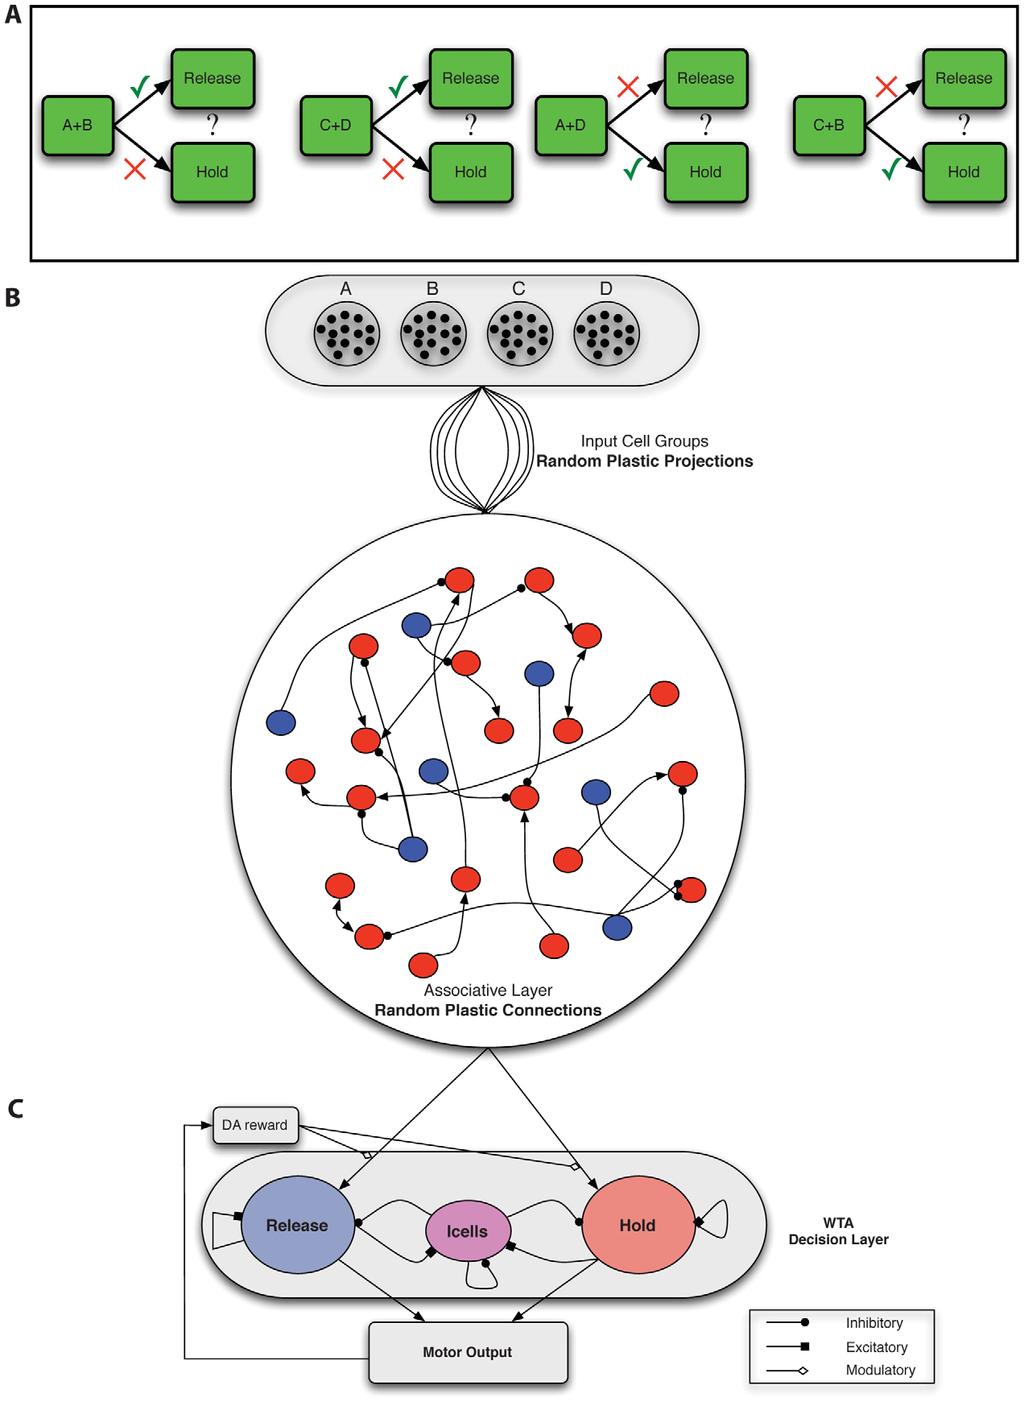 Figure 1. Biconditional discrimination task logic and network architecture. A. In an example of this task, two of four possible stimuli (A, B, C and D) are presented simultaneously to a subject [9].